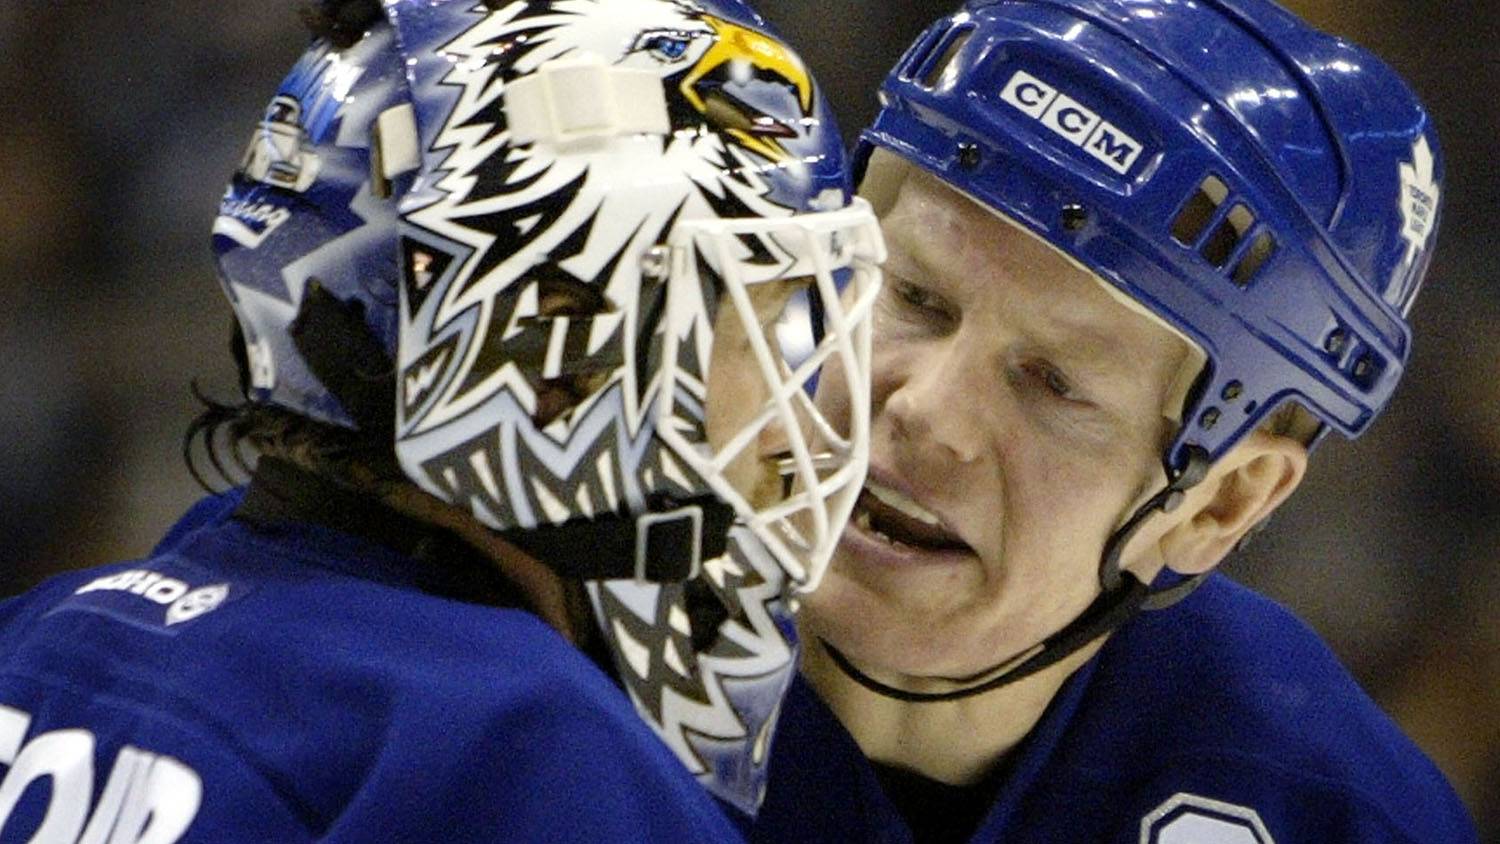 Next captain must want the responsibility: Maple Leafs great Mats Sundin